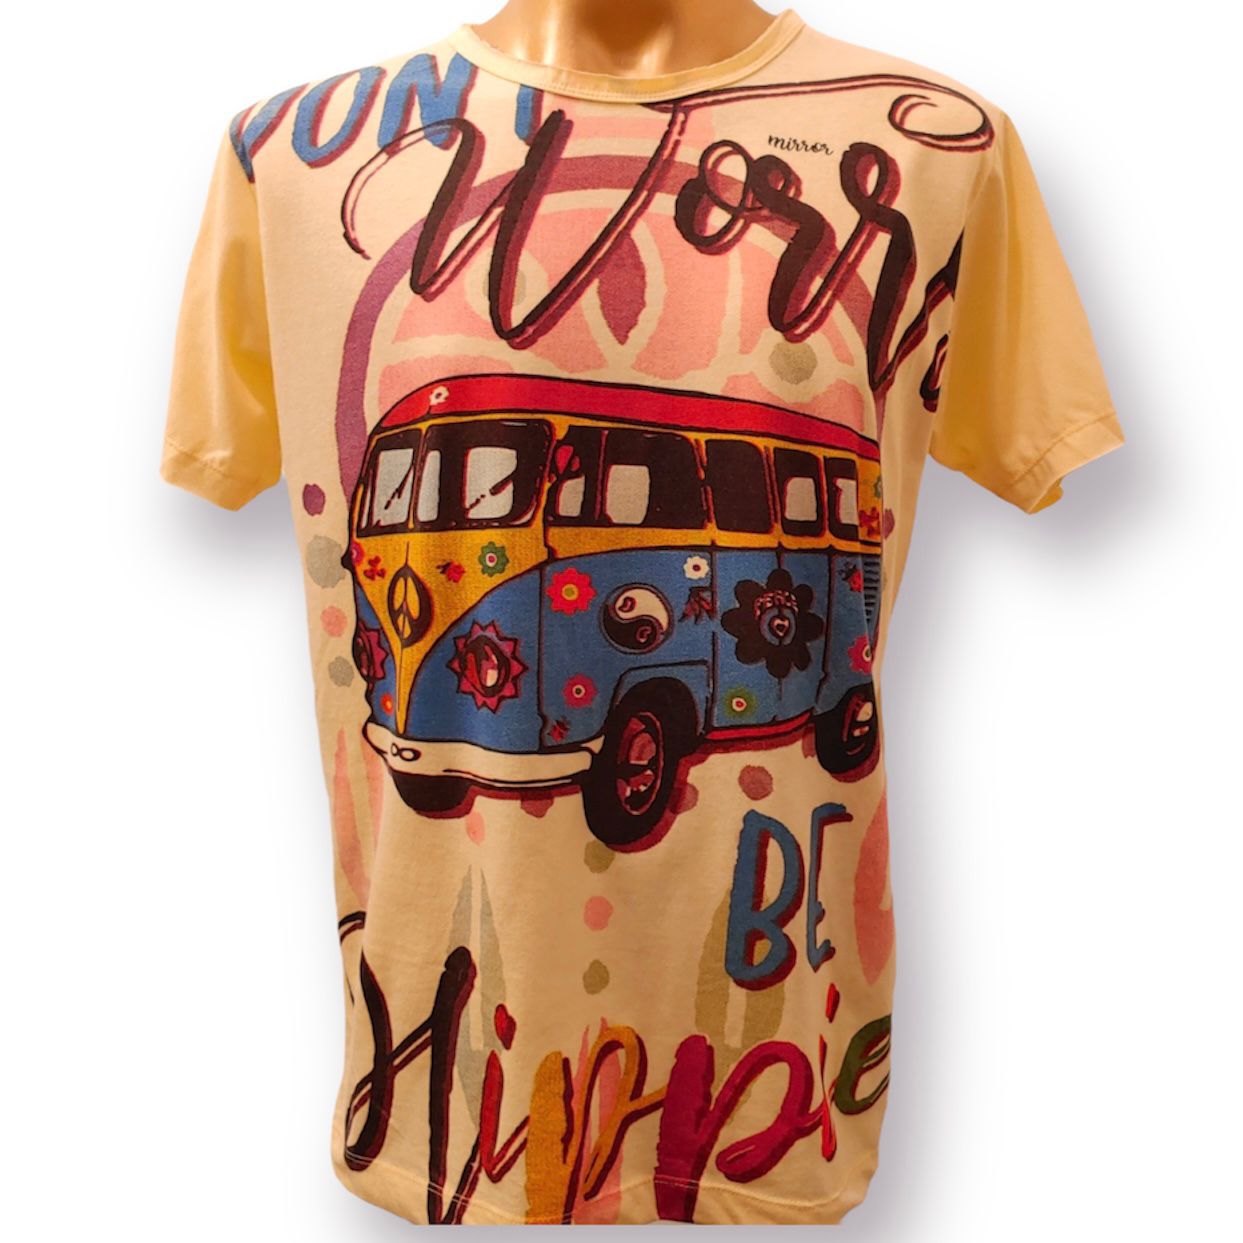 Don't Worry Be Hippie Men's T-shirt by Mirror Brand